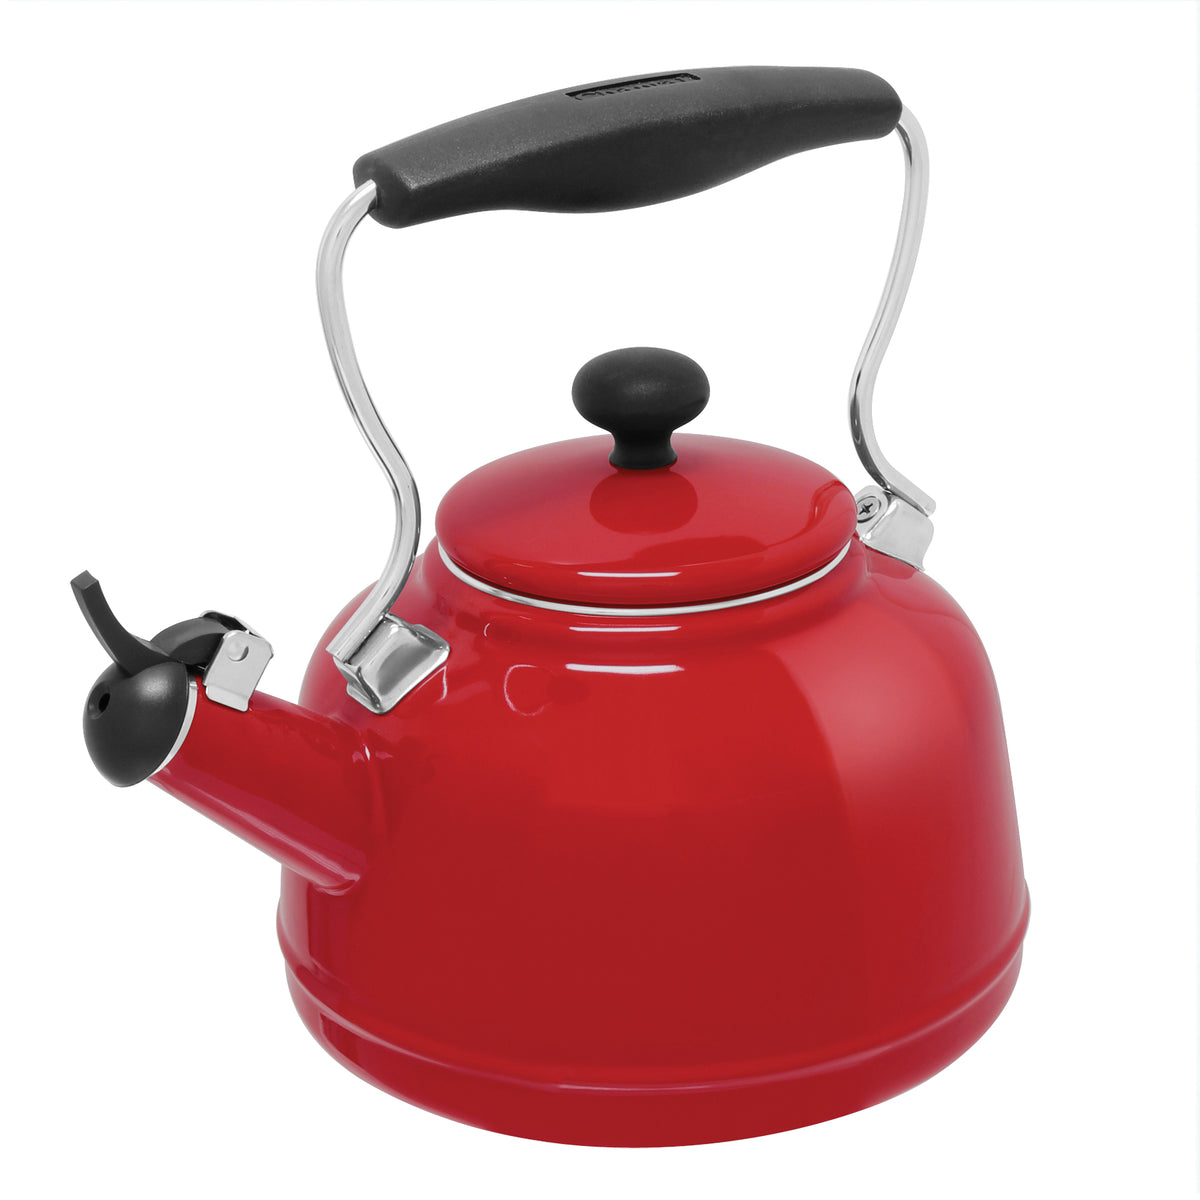 Stainless Steel Classic Teakettle (1.8 Qt.) – Chantal